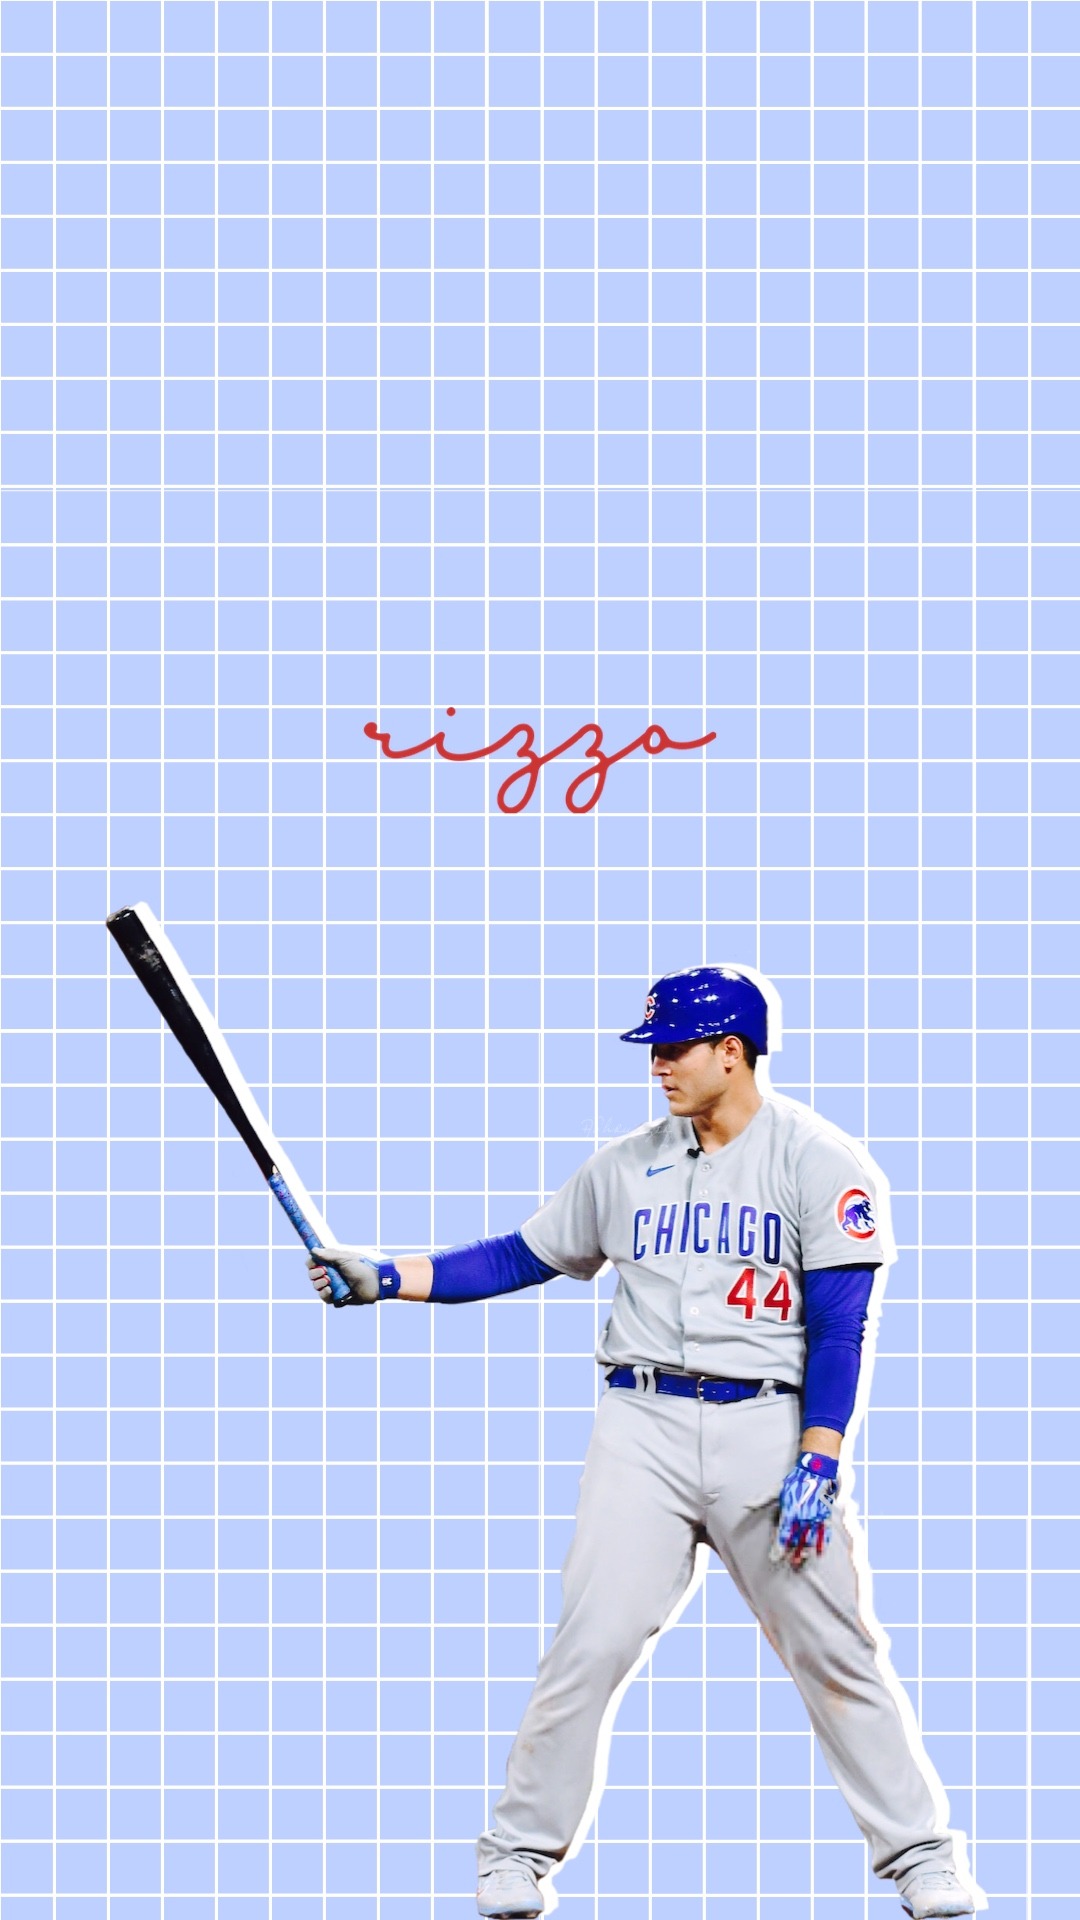 Anthony Rizzo Wallpapers